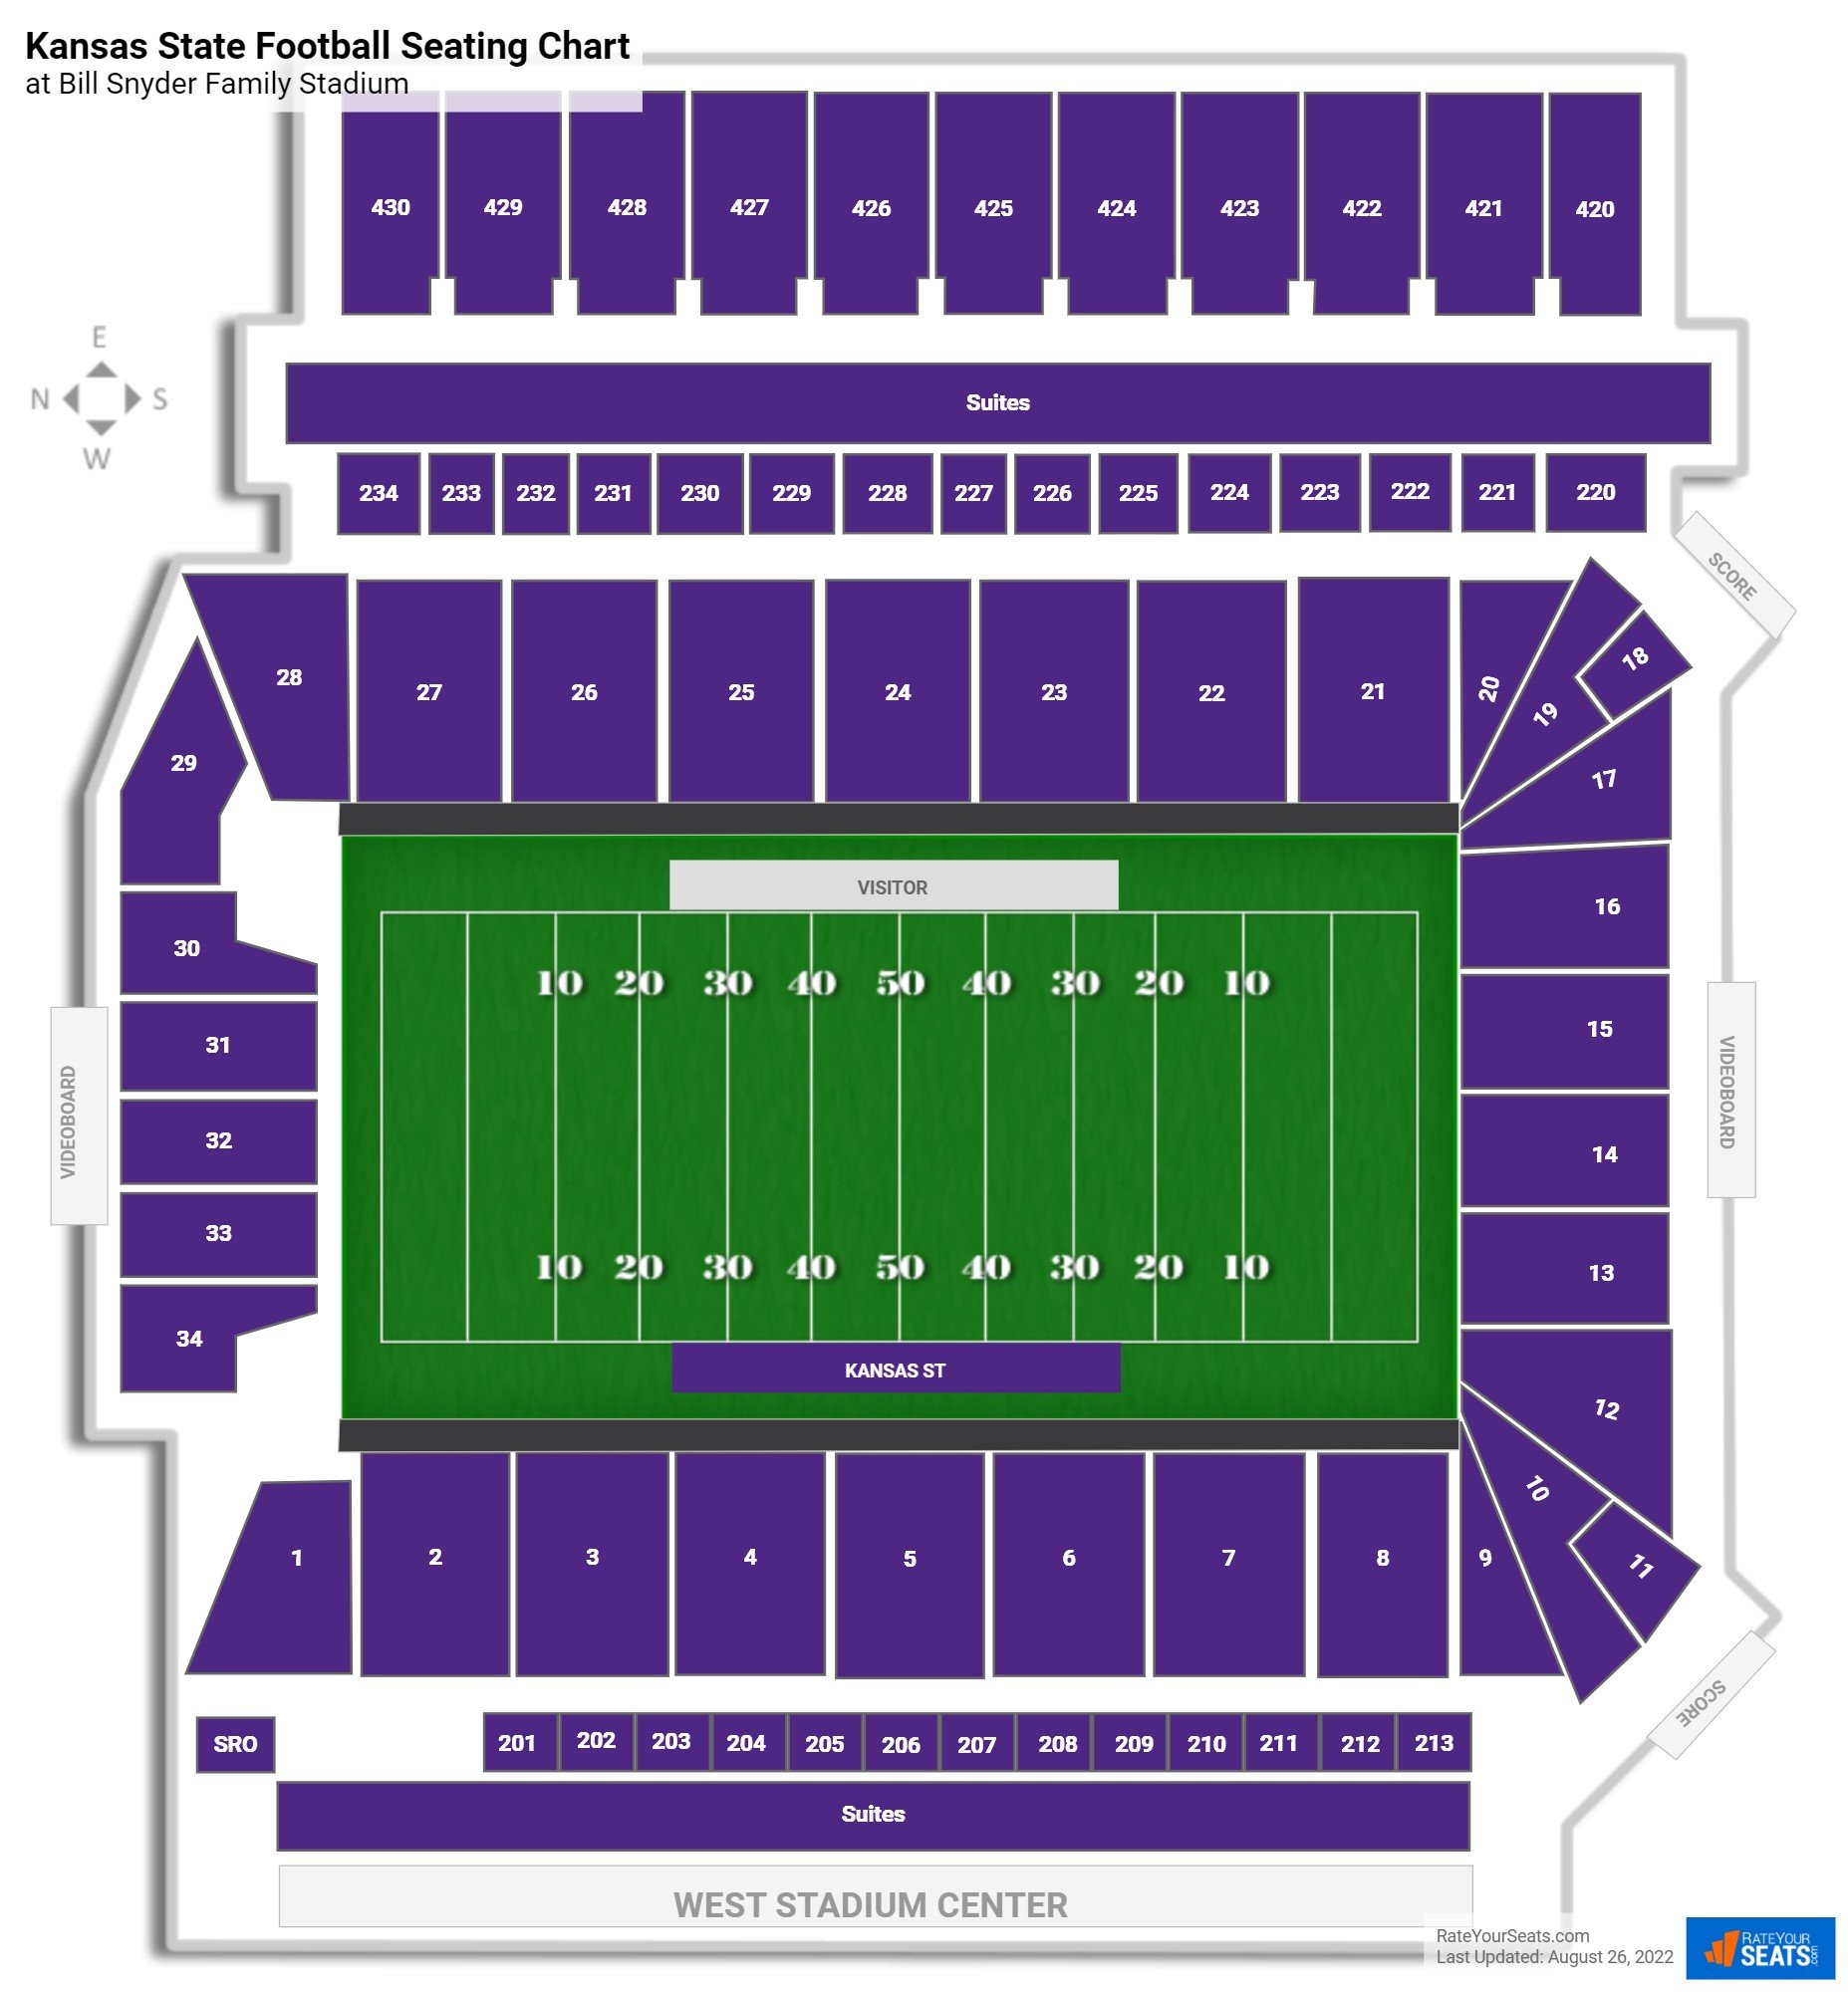 Bill Snyder Family Stadium Seating Chart - RateYourSeats.com